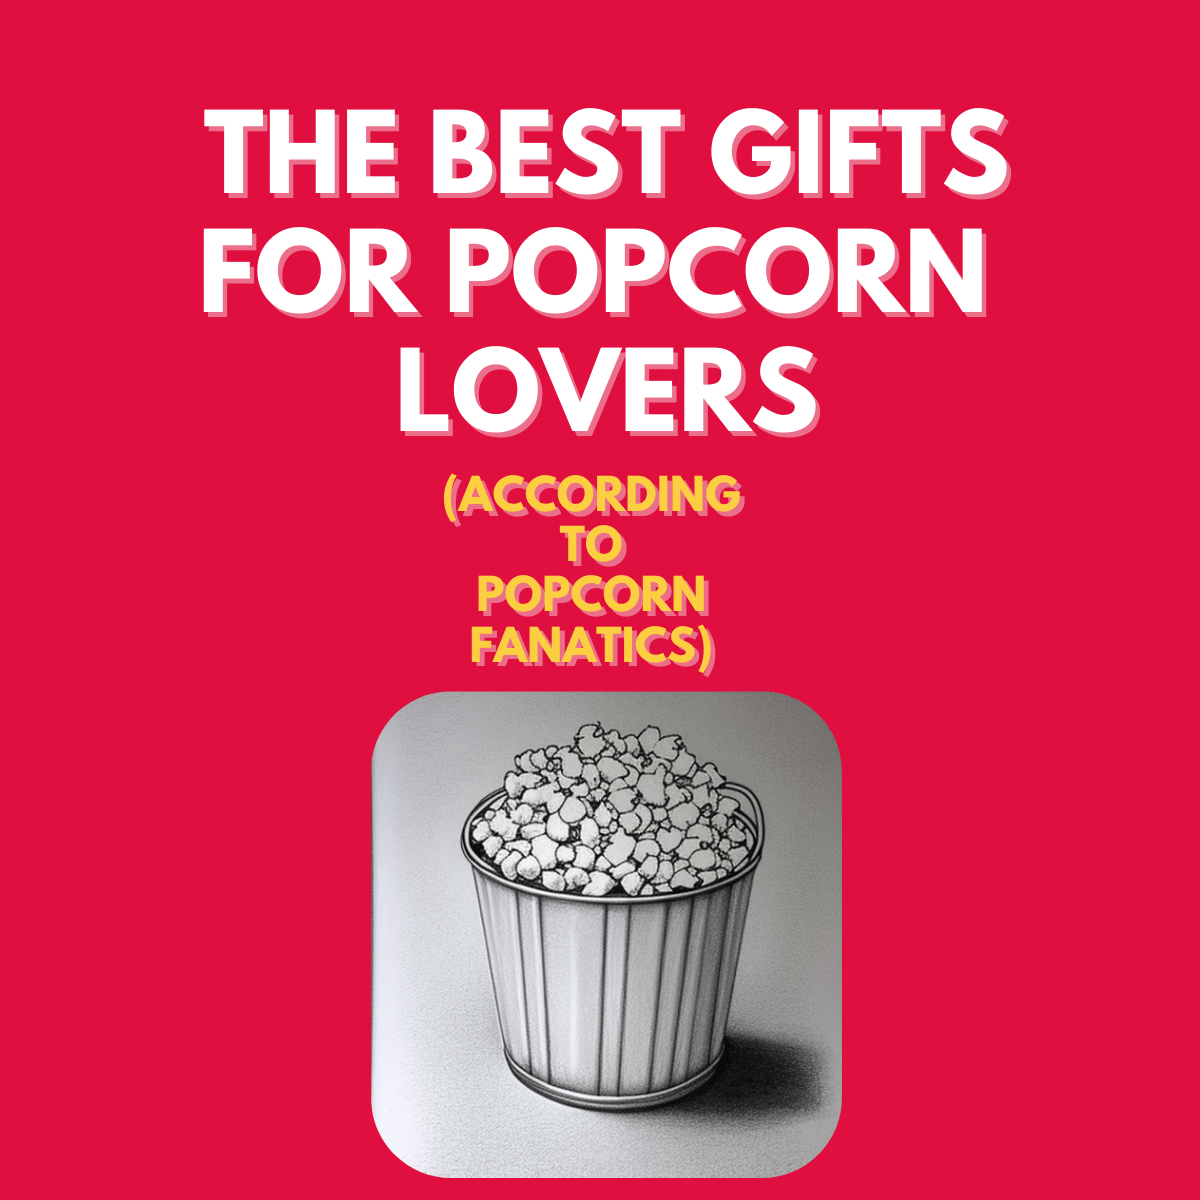 The Best Gifts for Popcorn Lovers (According to Popcorn Fanatics)